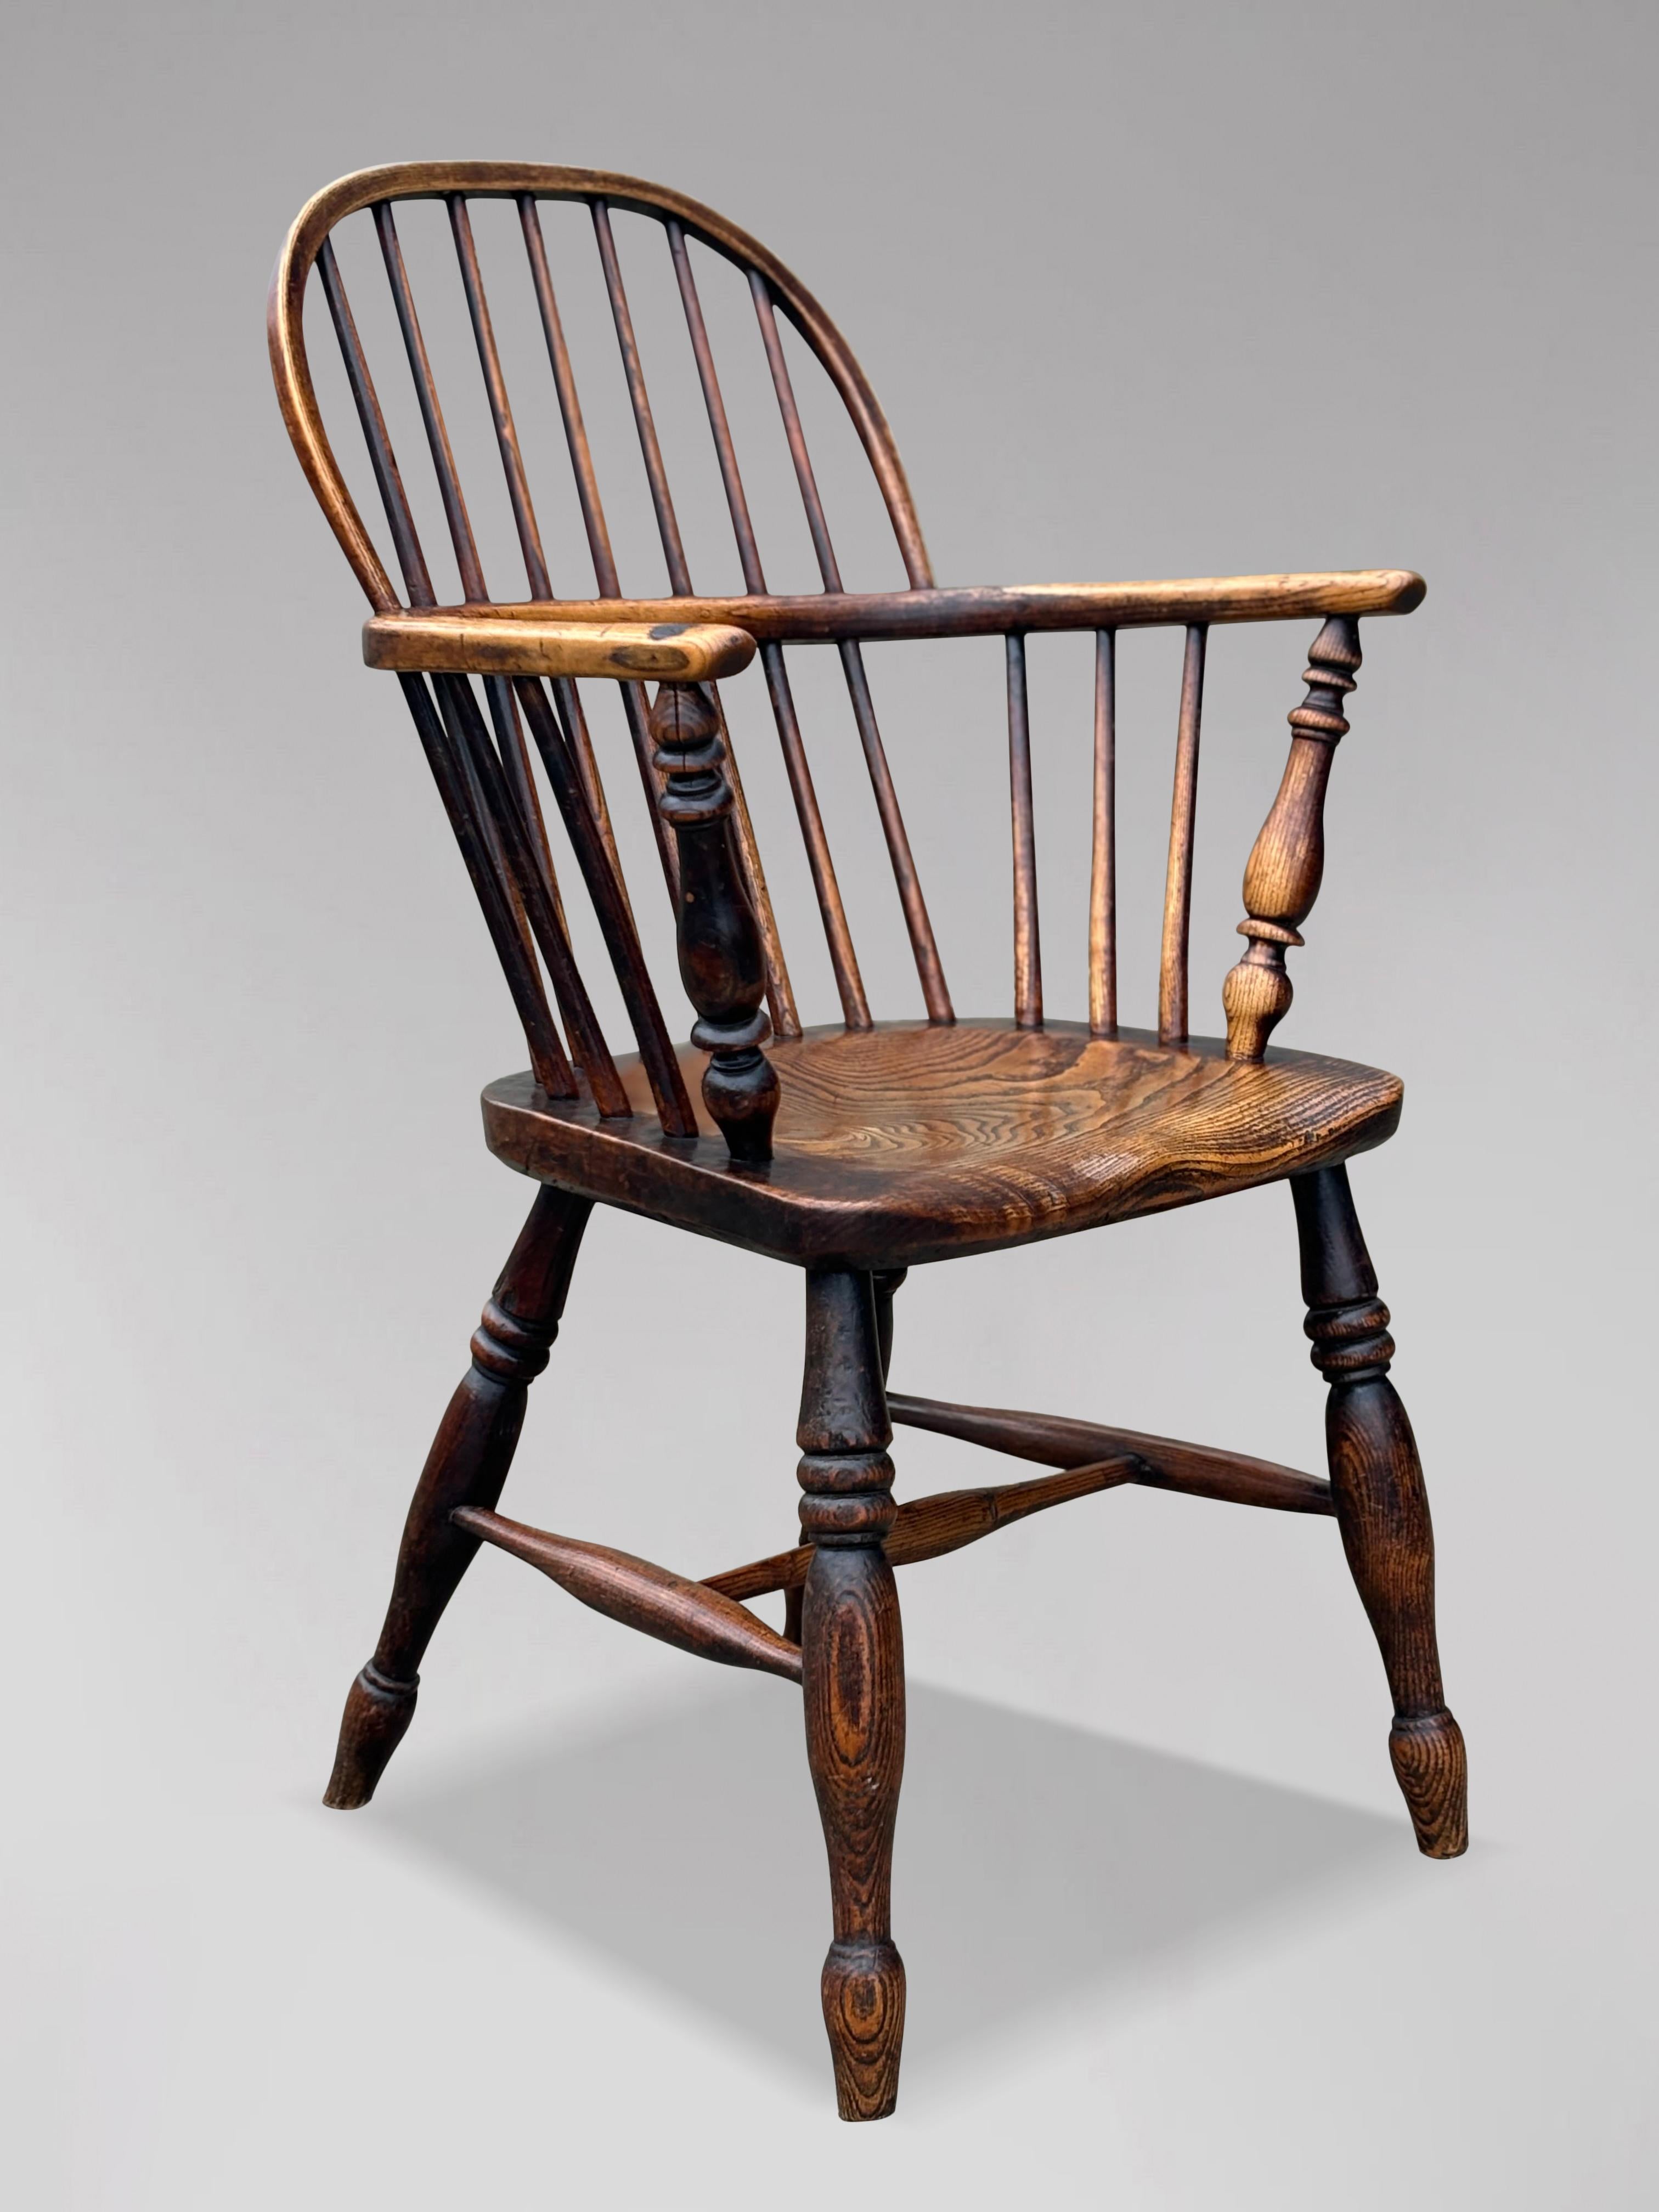 A fine 19th century quality English ash & elm Windsor armchair. Comprising stick and hoop back with a spindle back. The back rail is secured to a stunning solid saddle shaped elm seat with shaped arms on shaped supports. The armchair is raised on